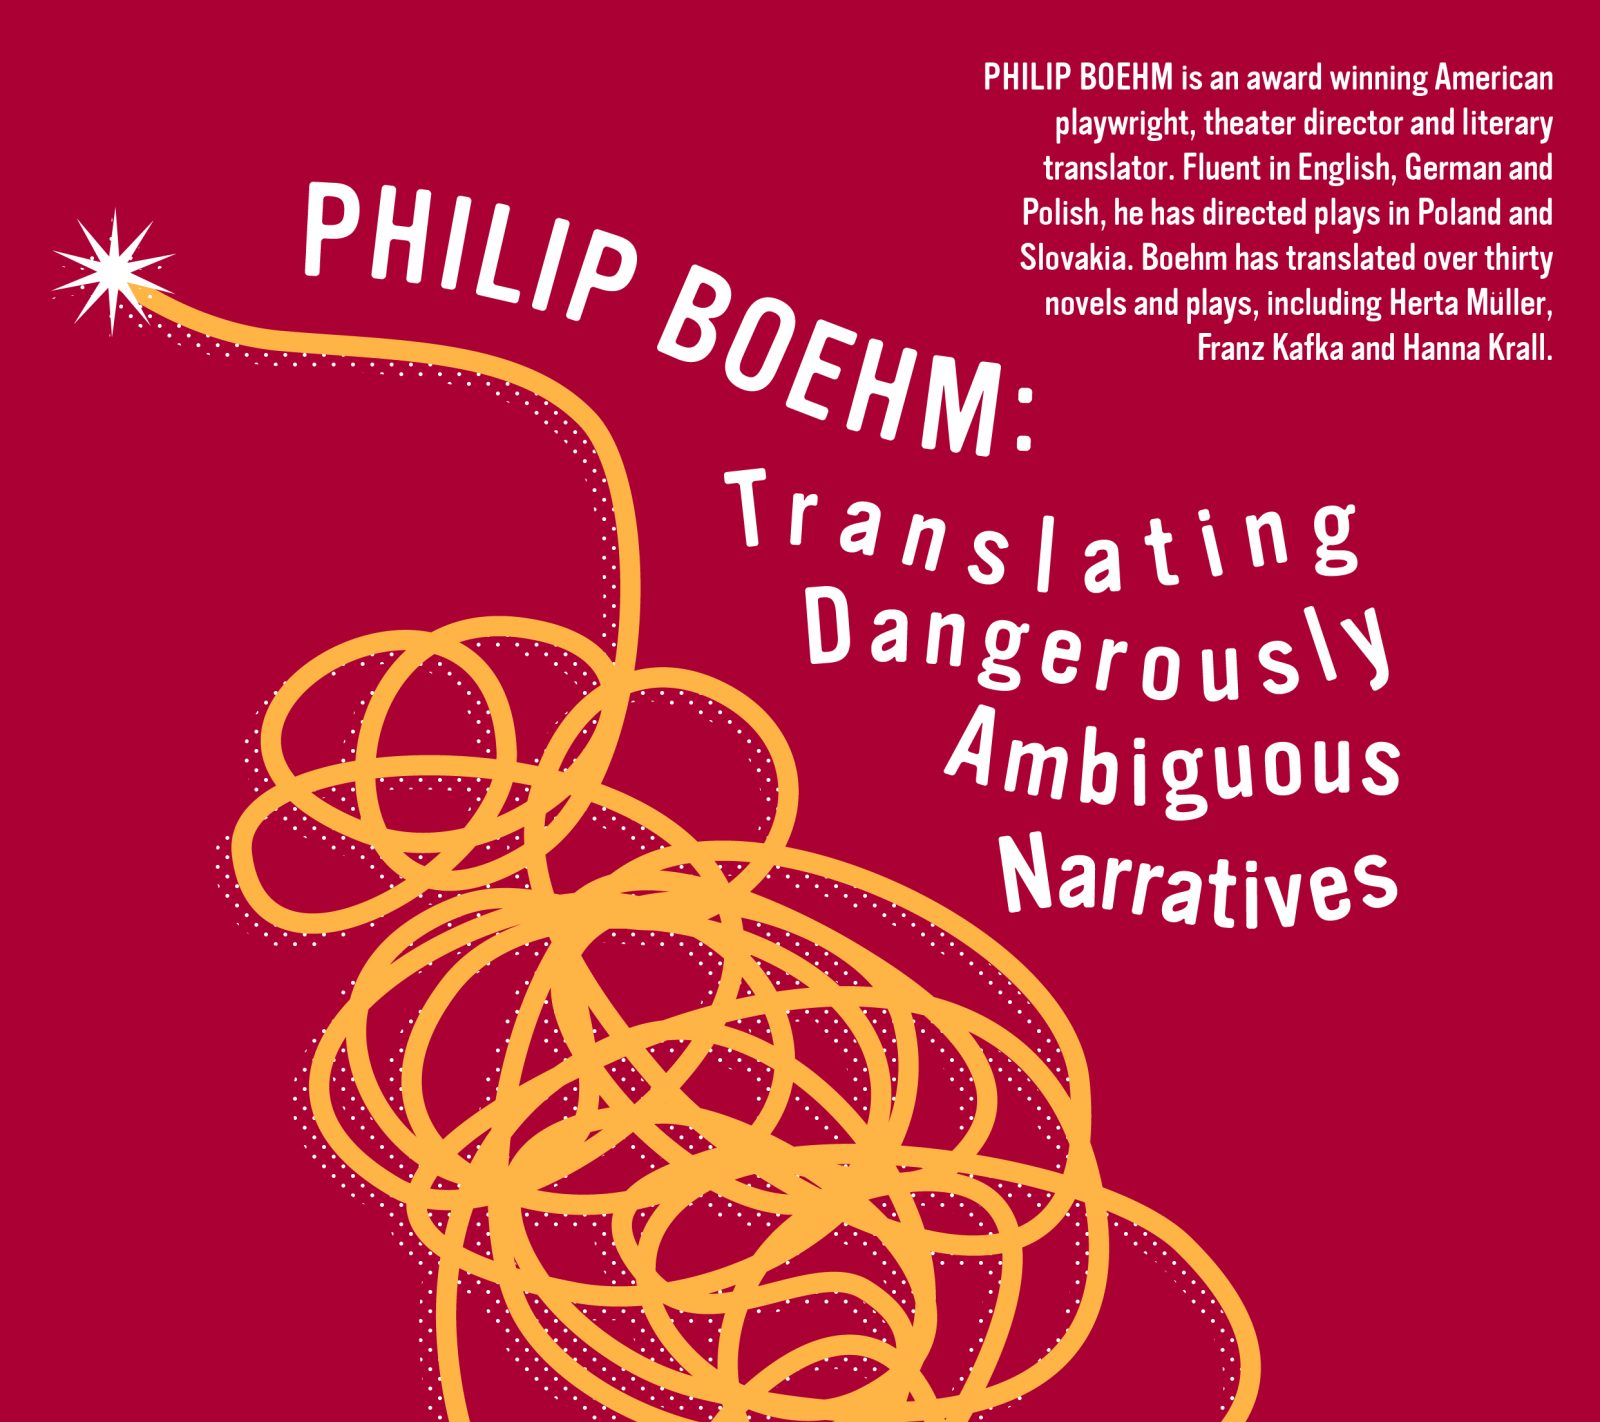 Burgundy flyer with yellow scribble and text describing Philip Boehm's talk